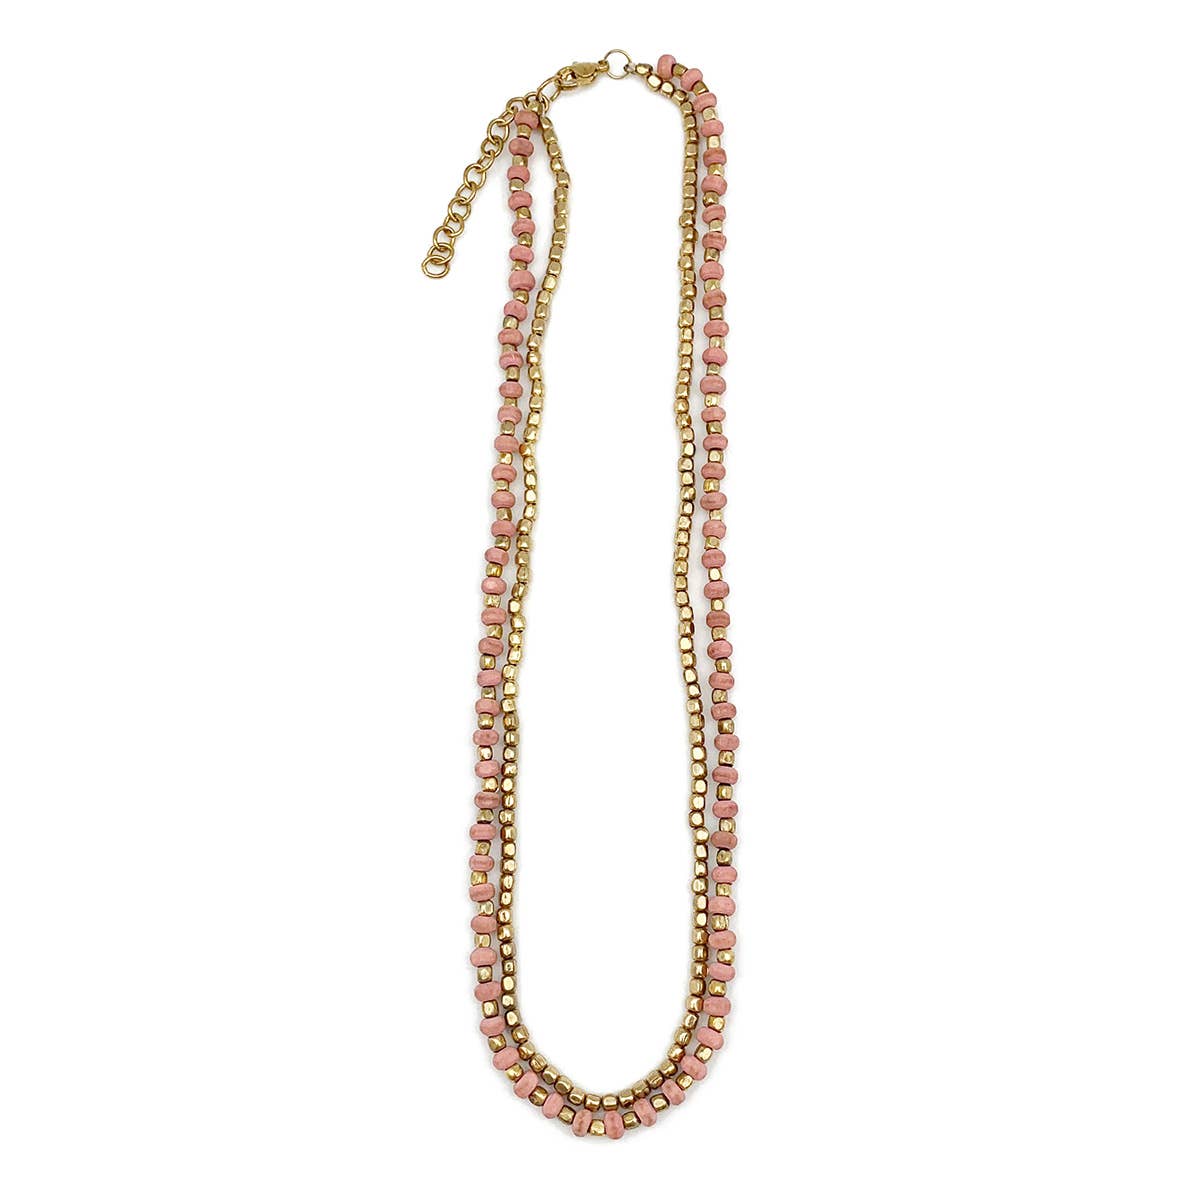 Sachi Mulberry Mix Necklace - Two Short Strands Light Pink